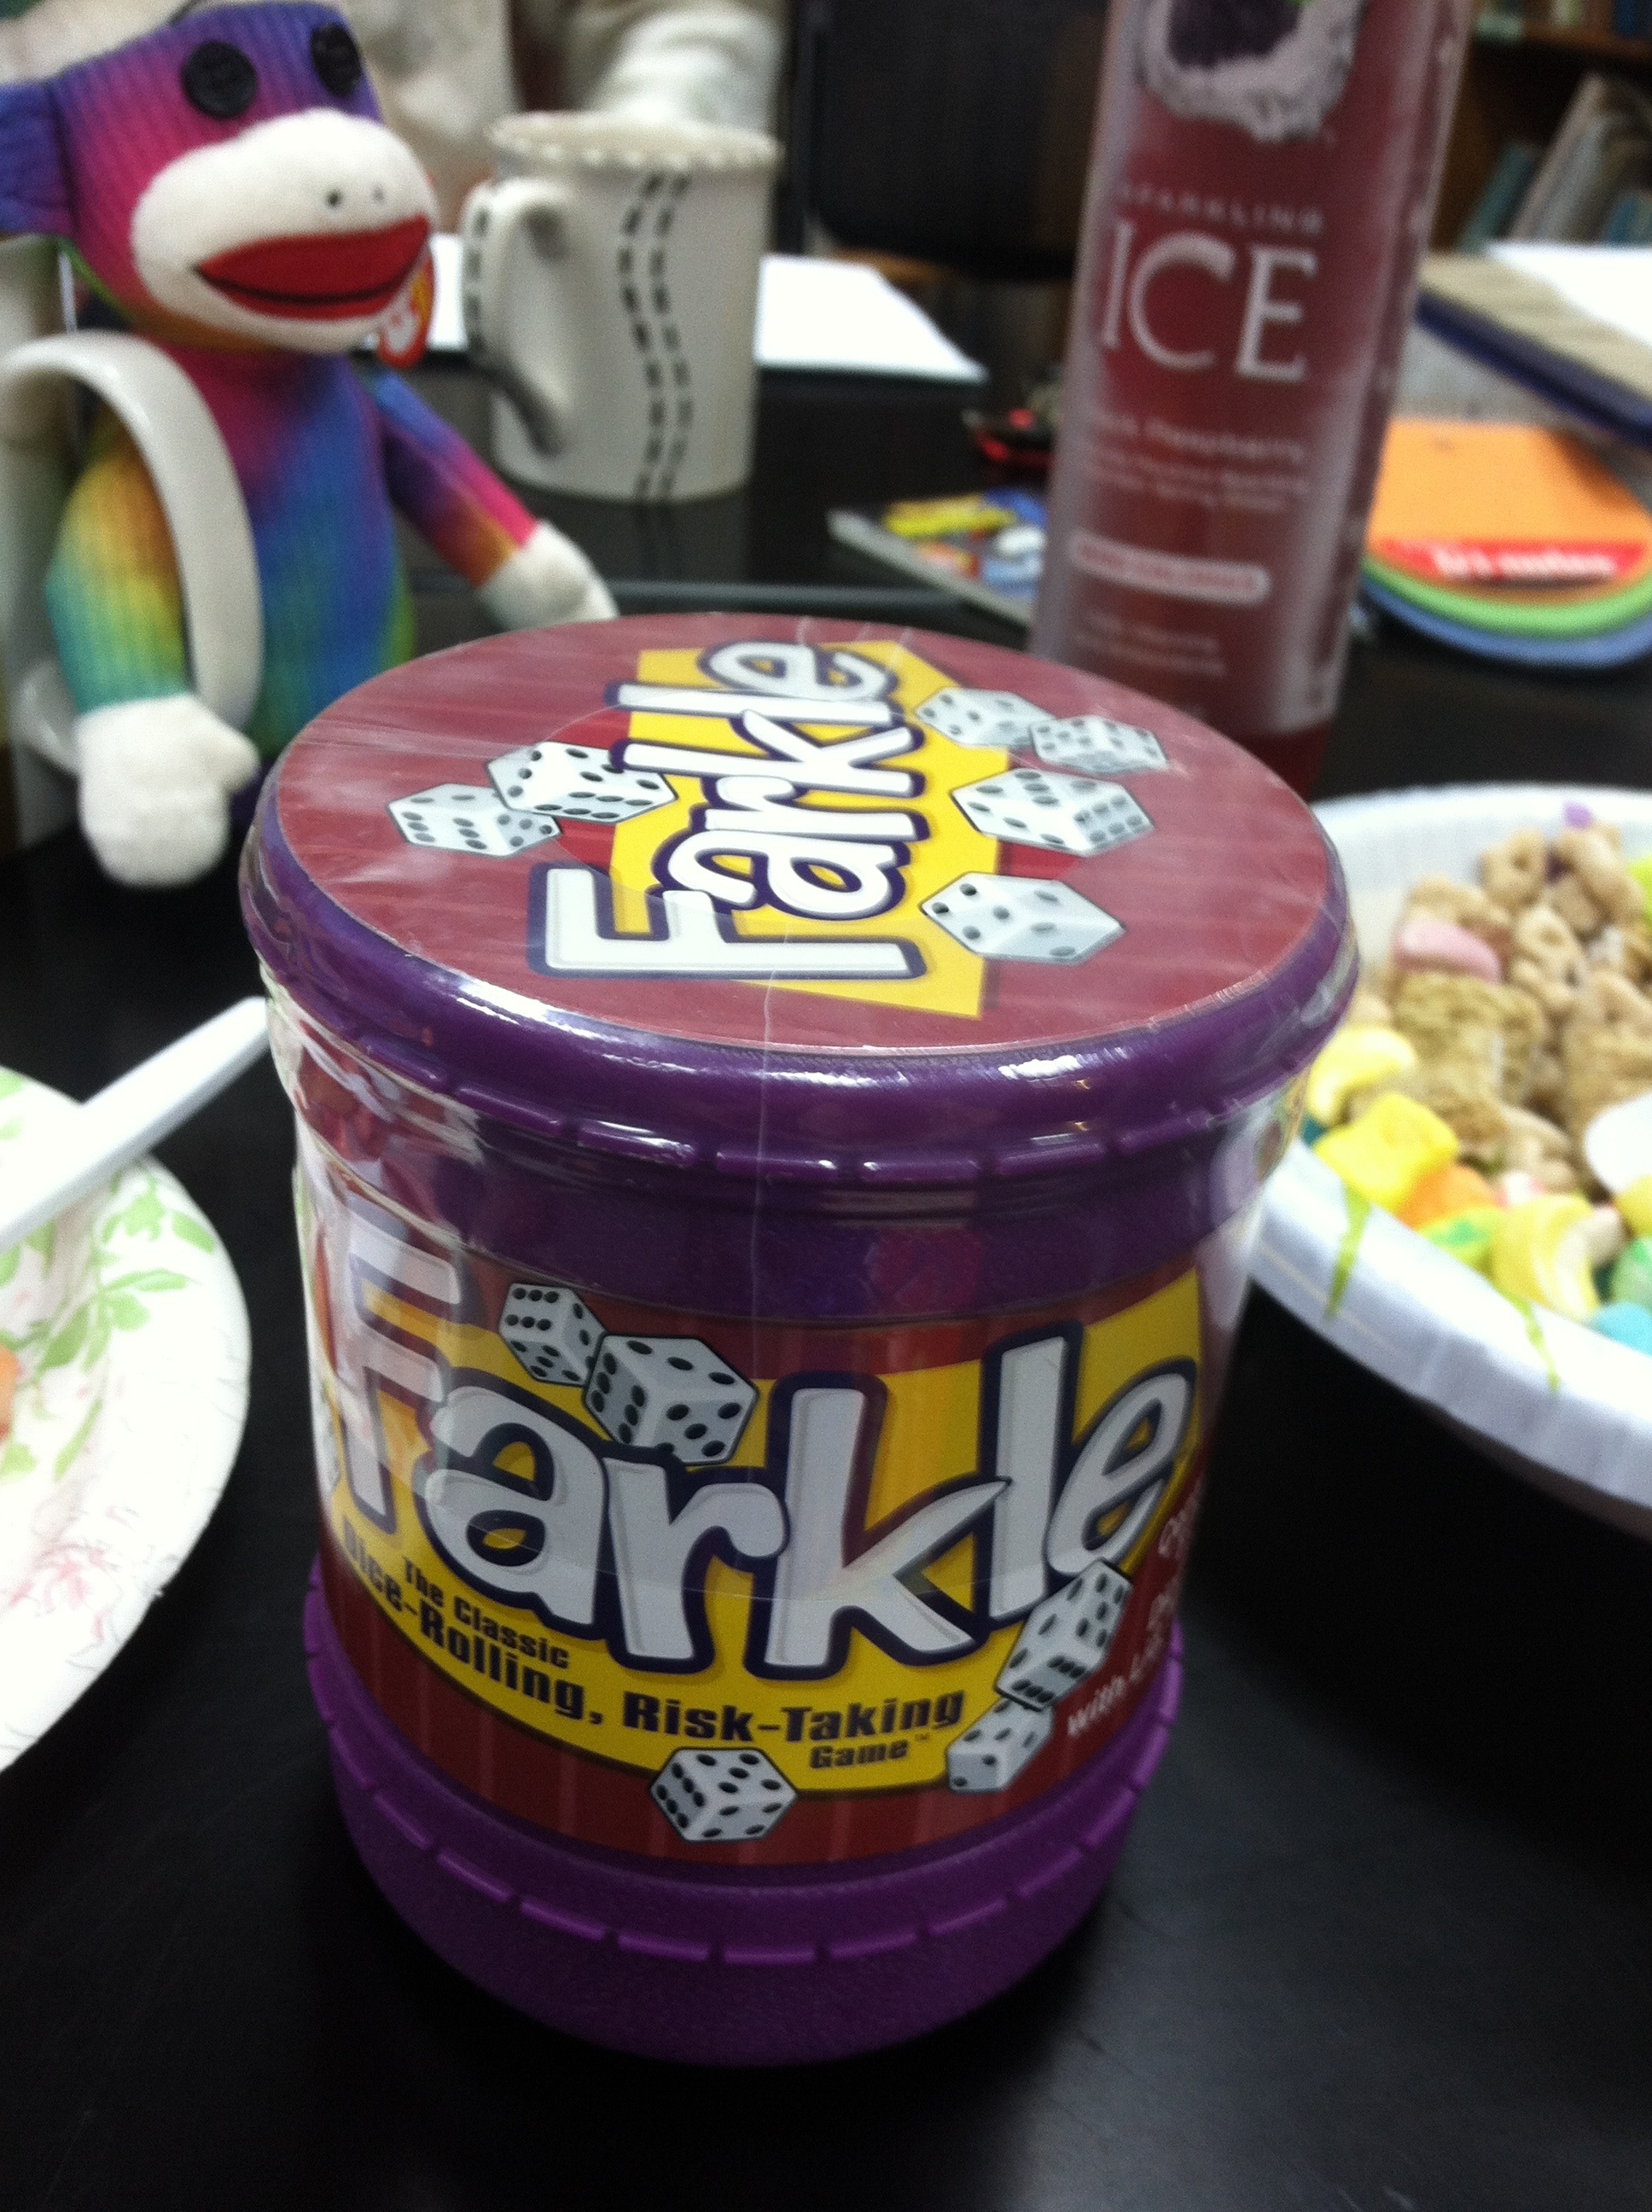 Farkle! (which is supposed to be really fun!)